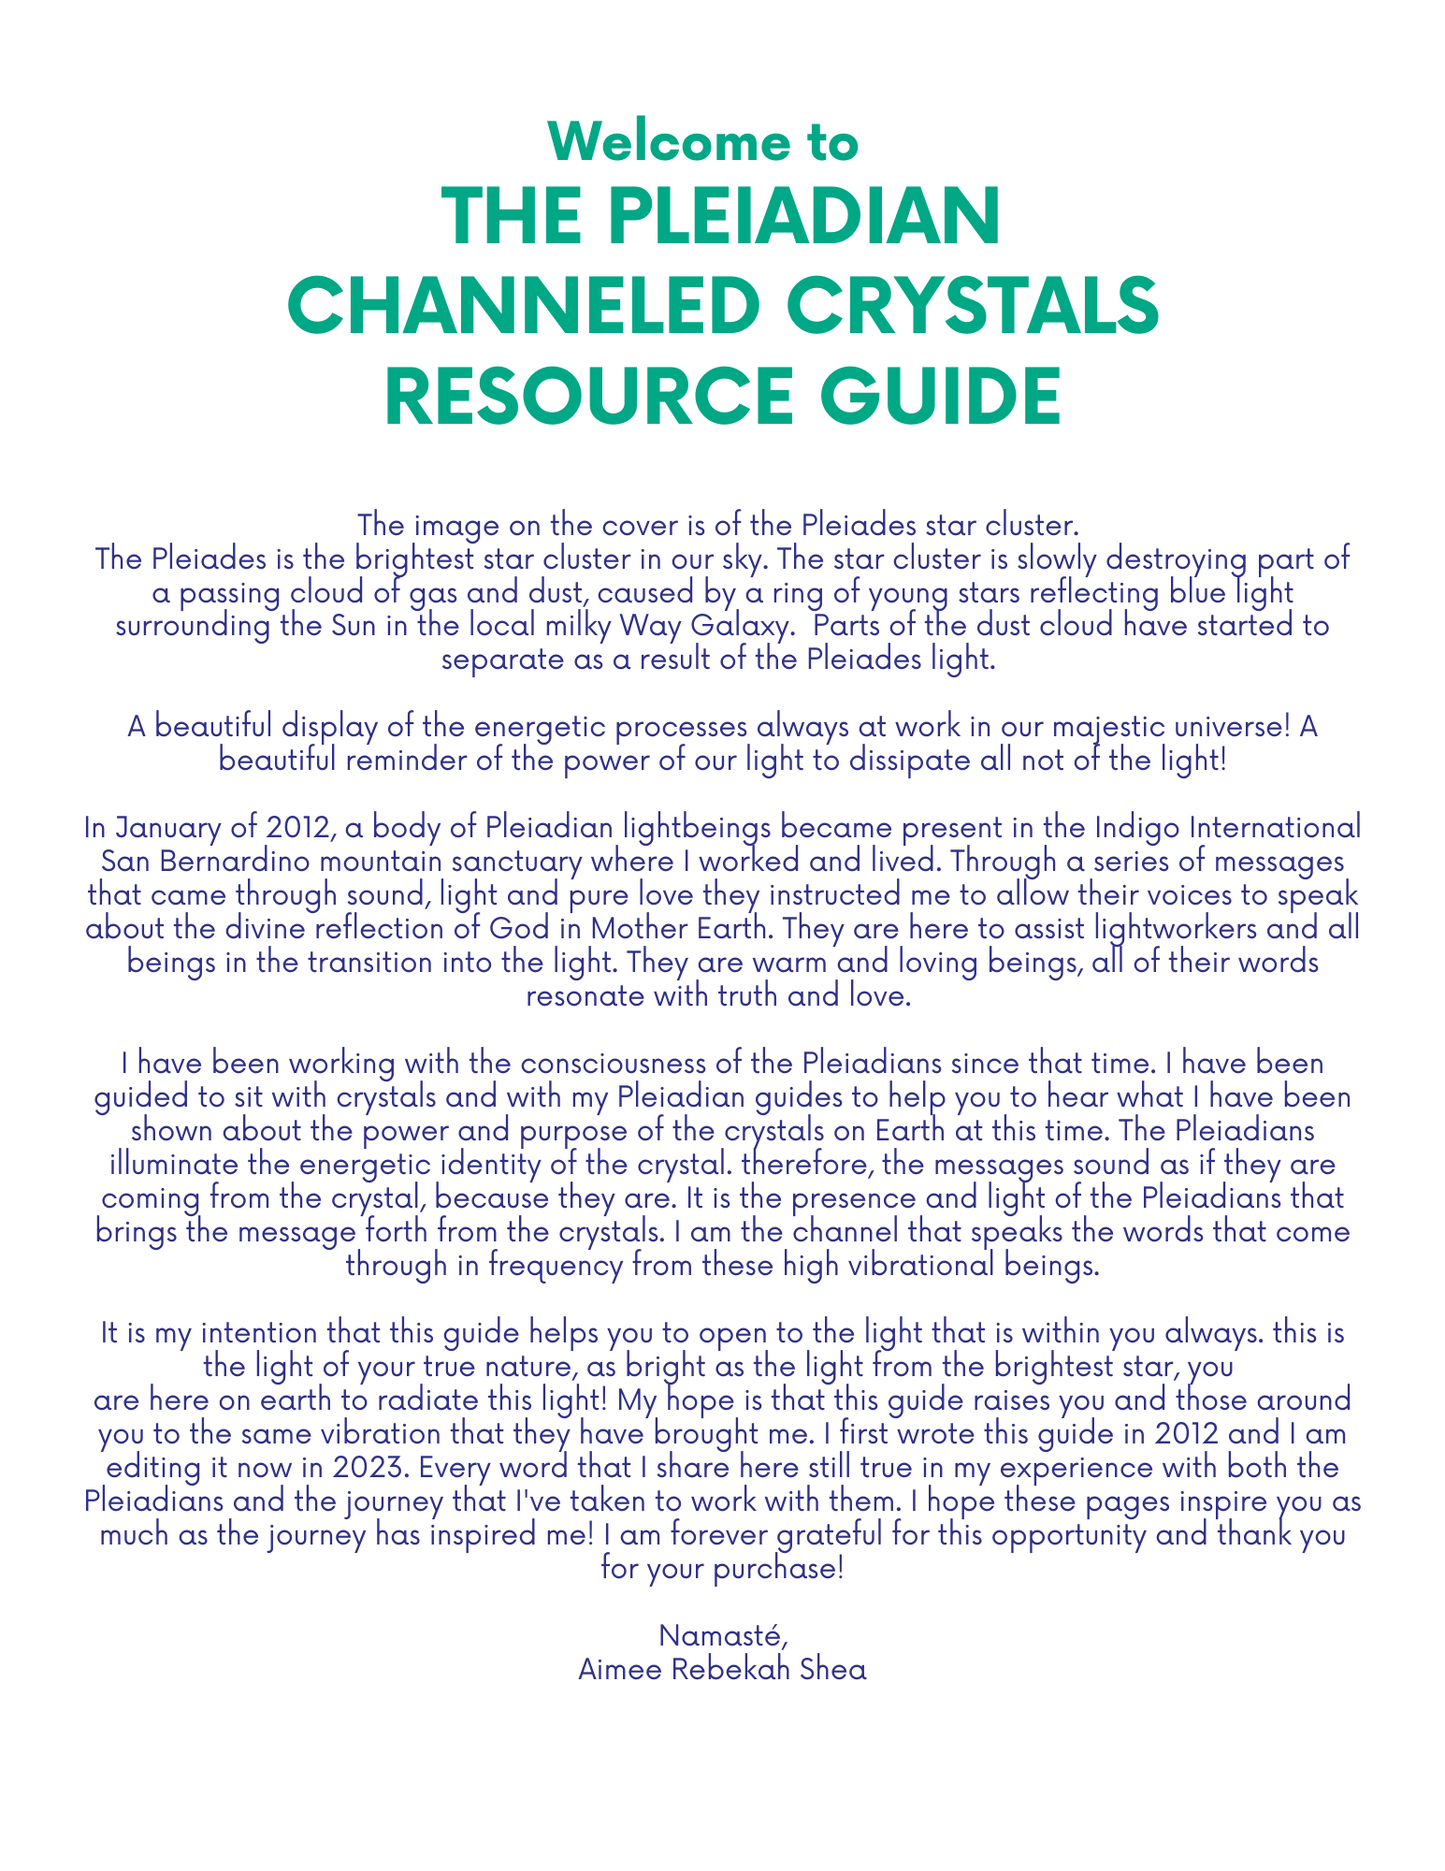 Pleiadian Channeled Crystals: Intuitive Crystal Reading